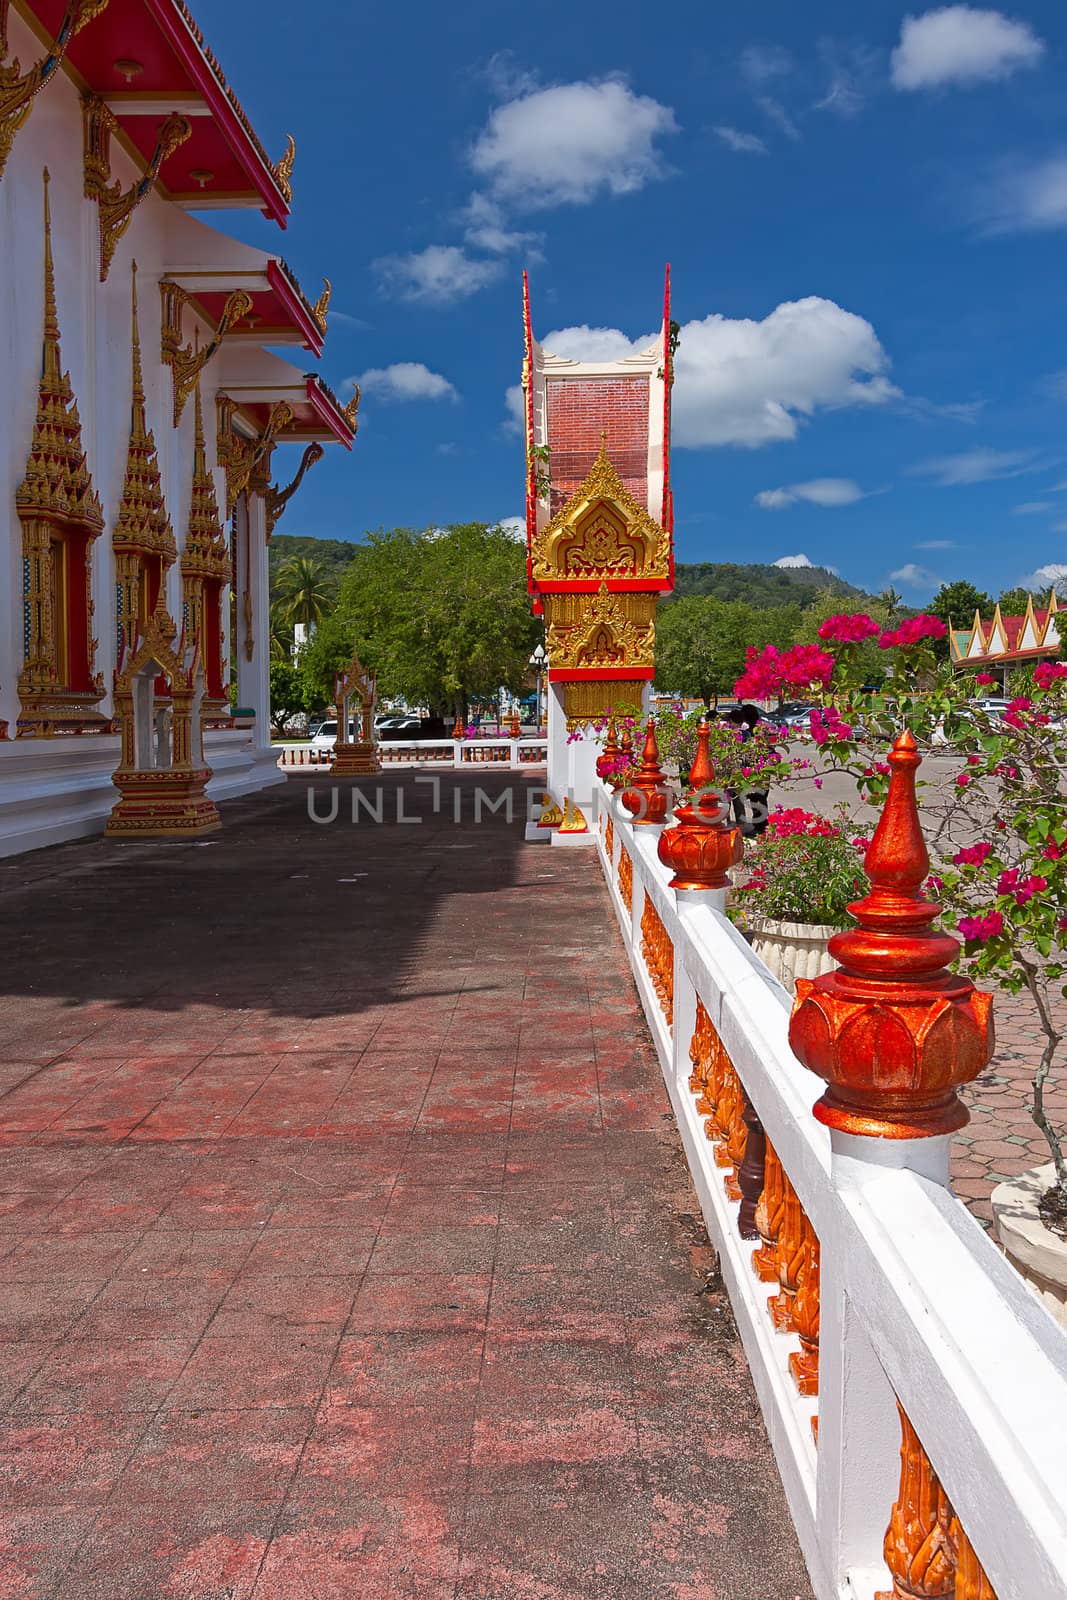 Beautiful Buddhist temple on  background of blue sky, Thailand.